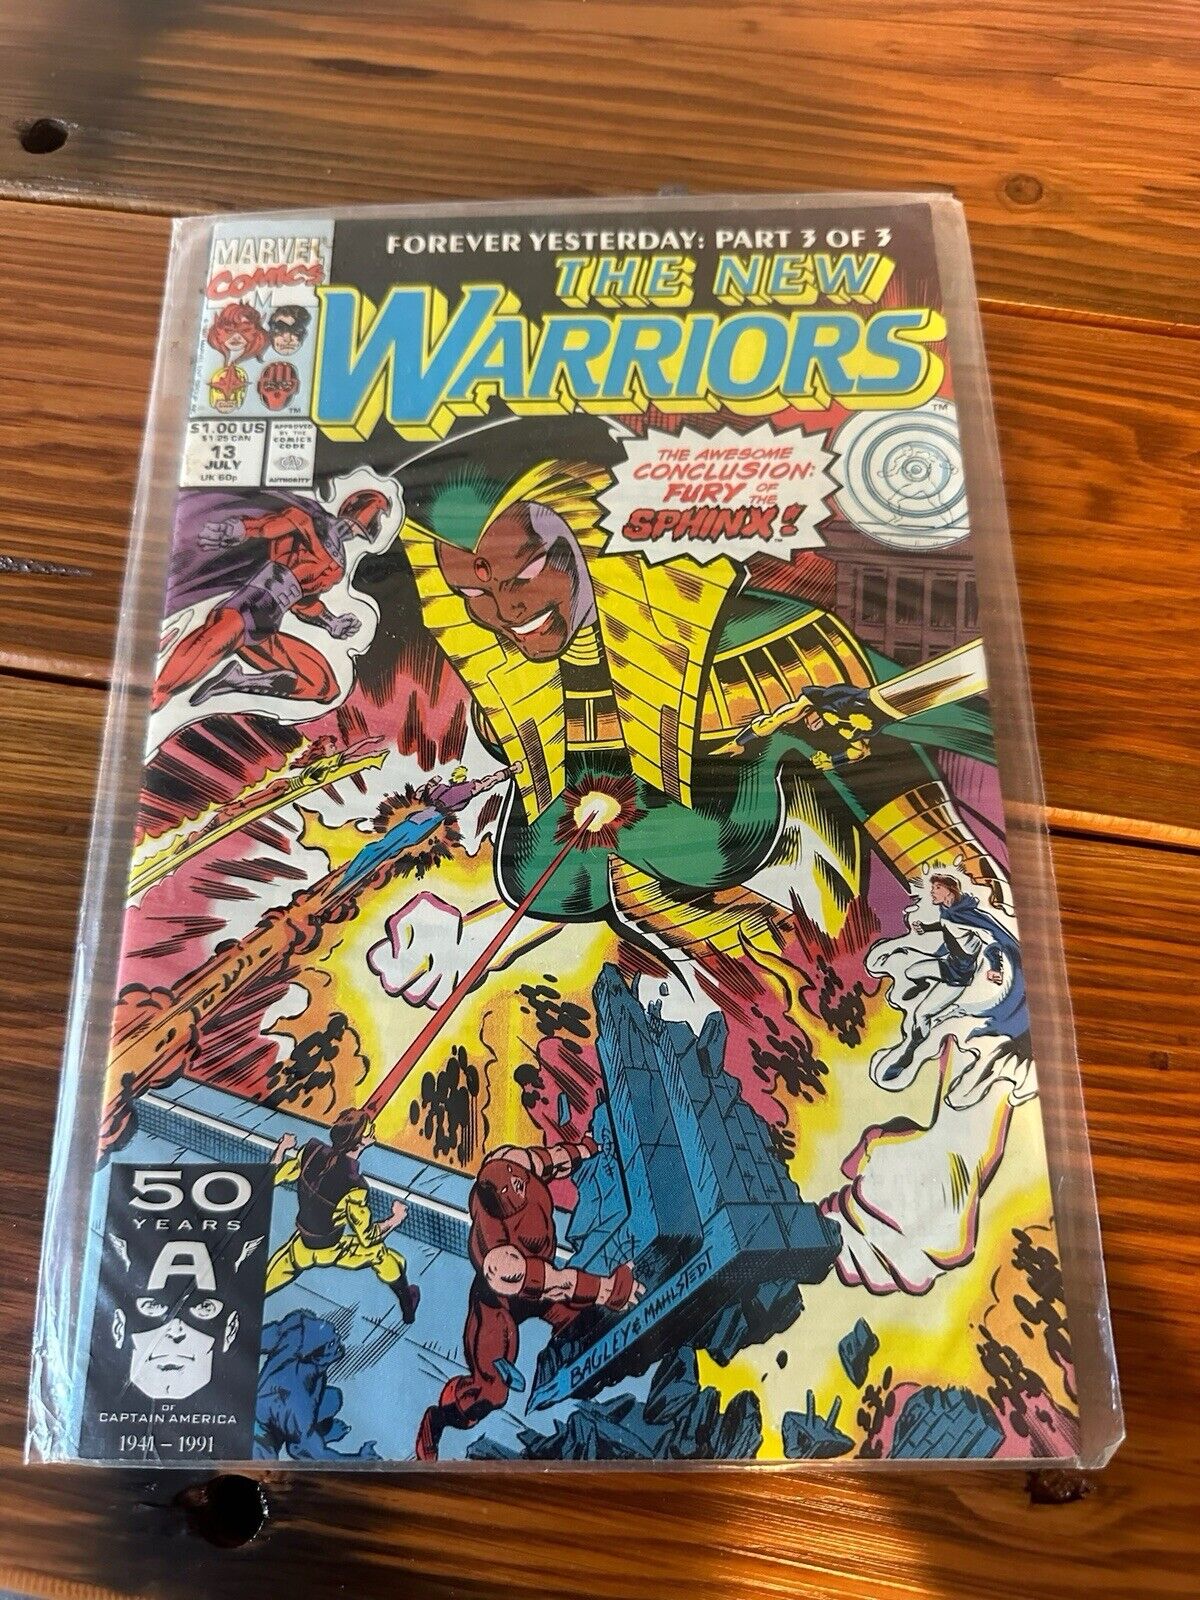 The New Warriors Vol 1 #13 - Forever Yesterday Part 3 of 3 - July 1991